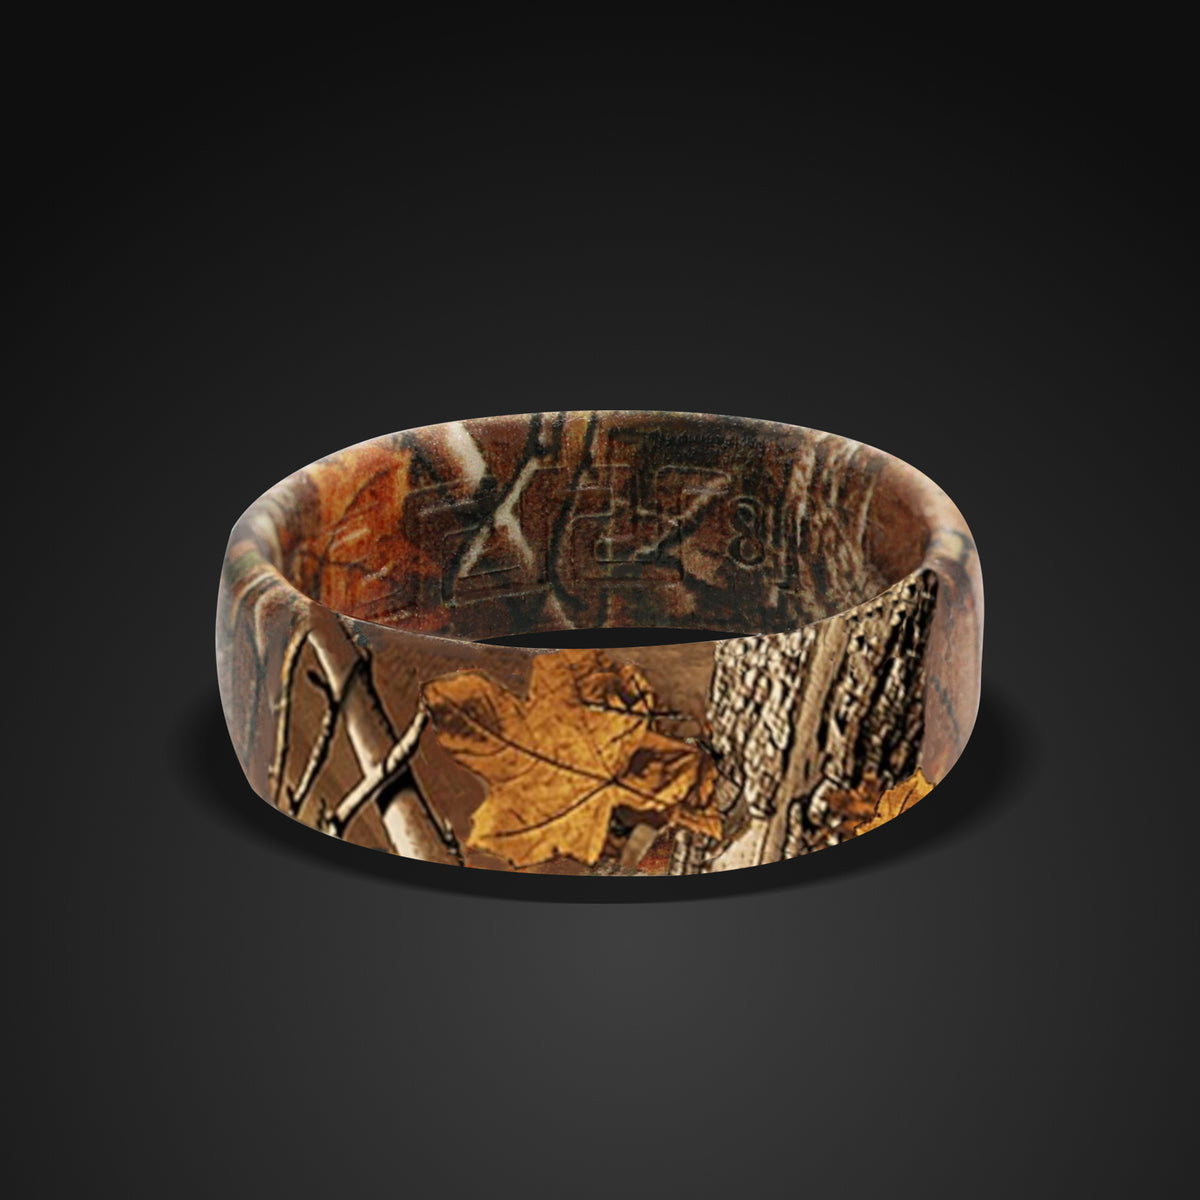 New Mossy Oak Silicone Wedding Bands from Groove Rings